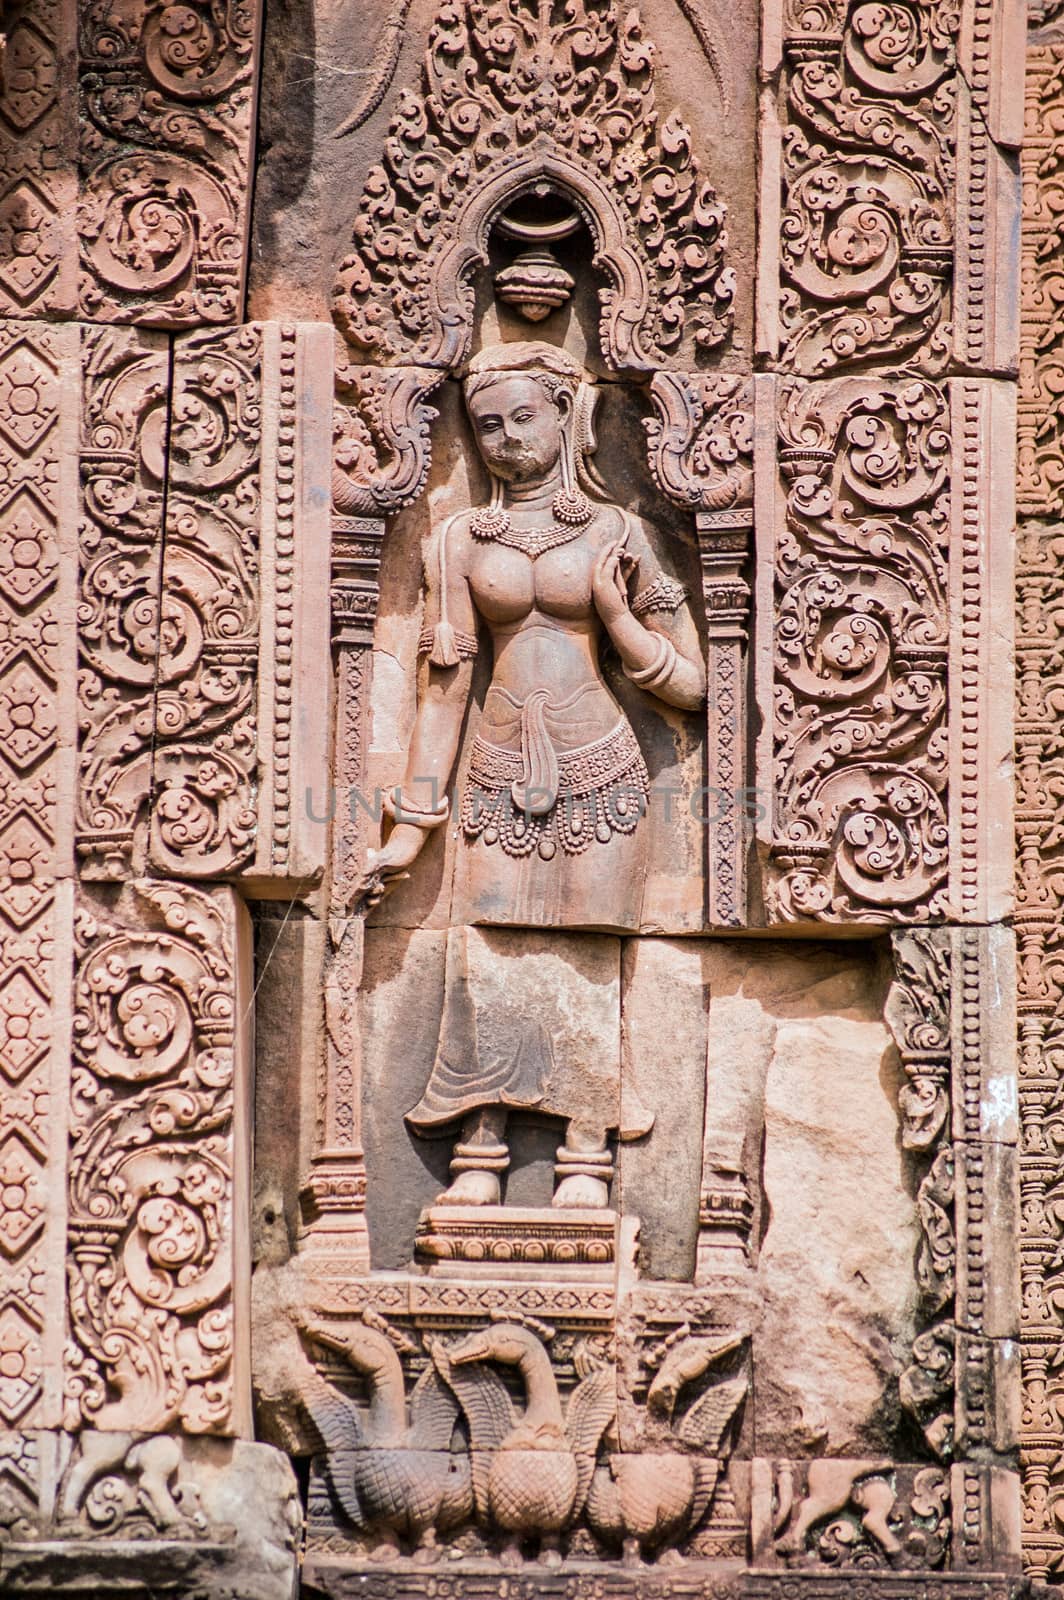 Ancient Khmer bas relief carving of a devata goddess with a gaggle of geese on a Prasat at Banteay Srei Temple, Angkor, Cambodia. Sandstone carving over 1000 years old.